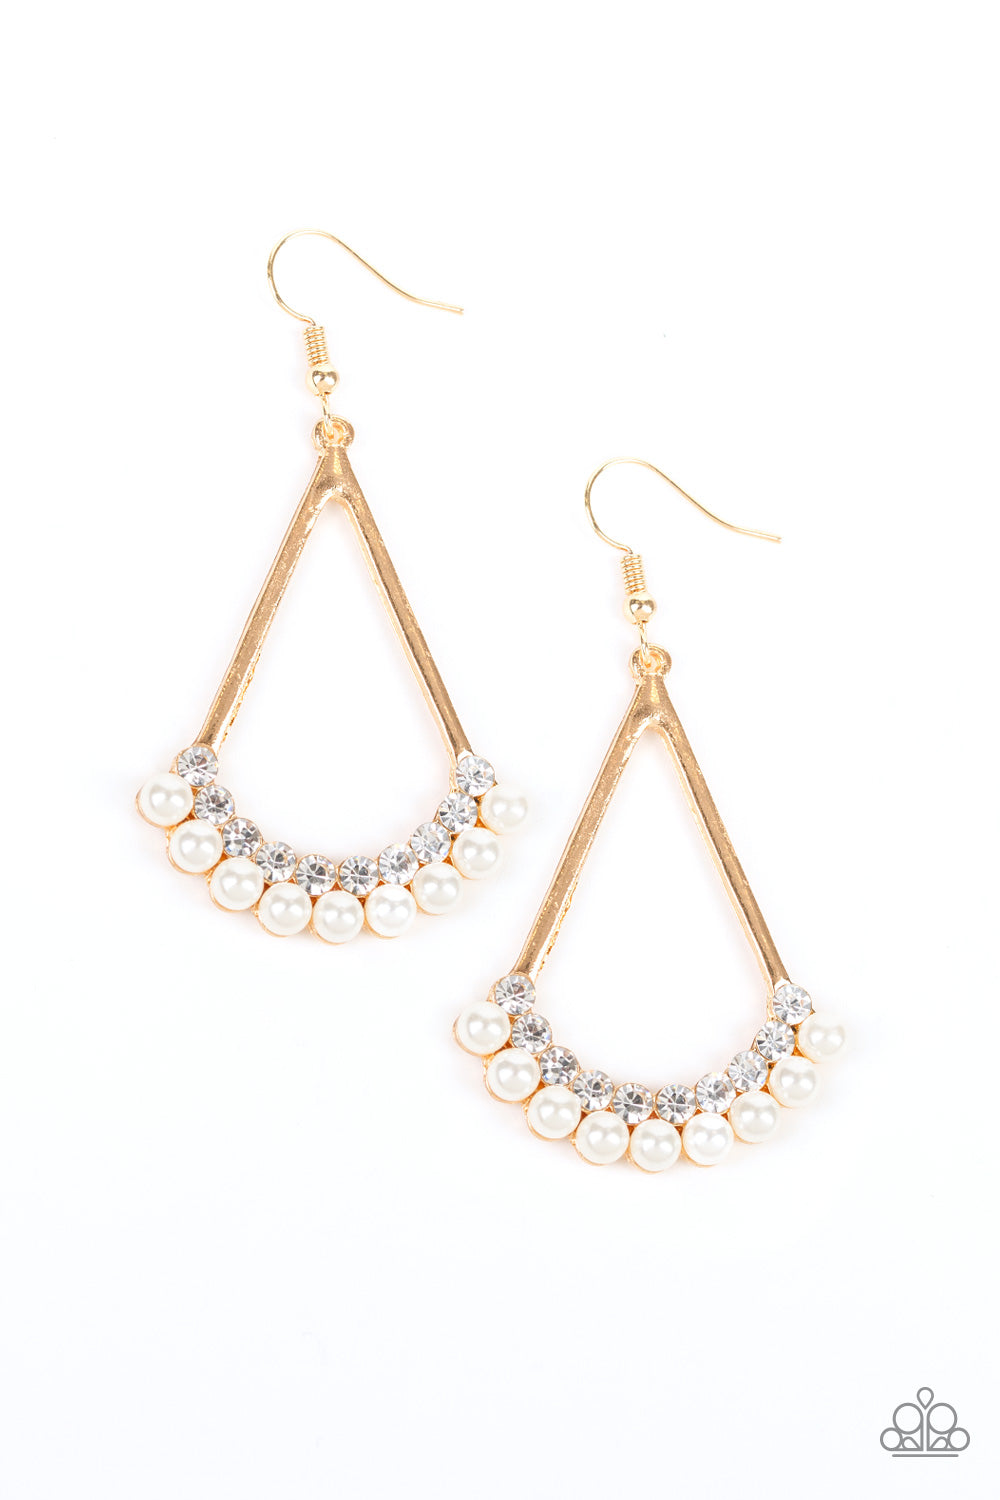 Paparazzi Accessories - Top to Bottom - Gold Earrings